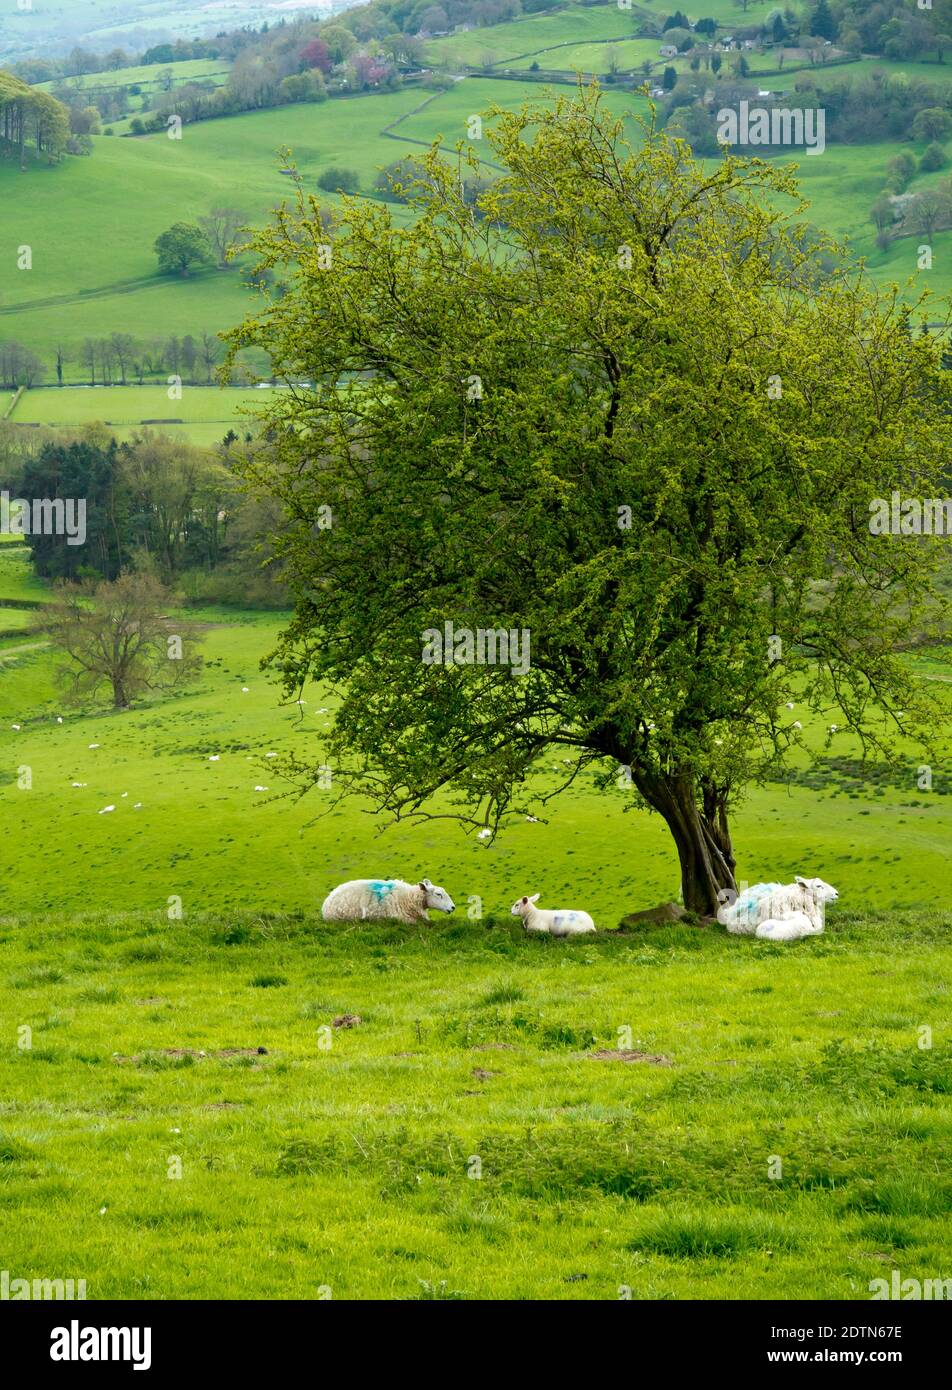 Sheep grazing in fields near Rowsley in the Peak District National Park Derbyshire Dales England UK Stock Photo